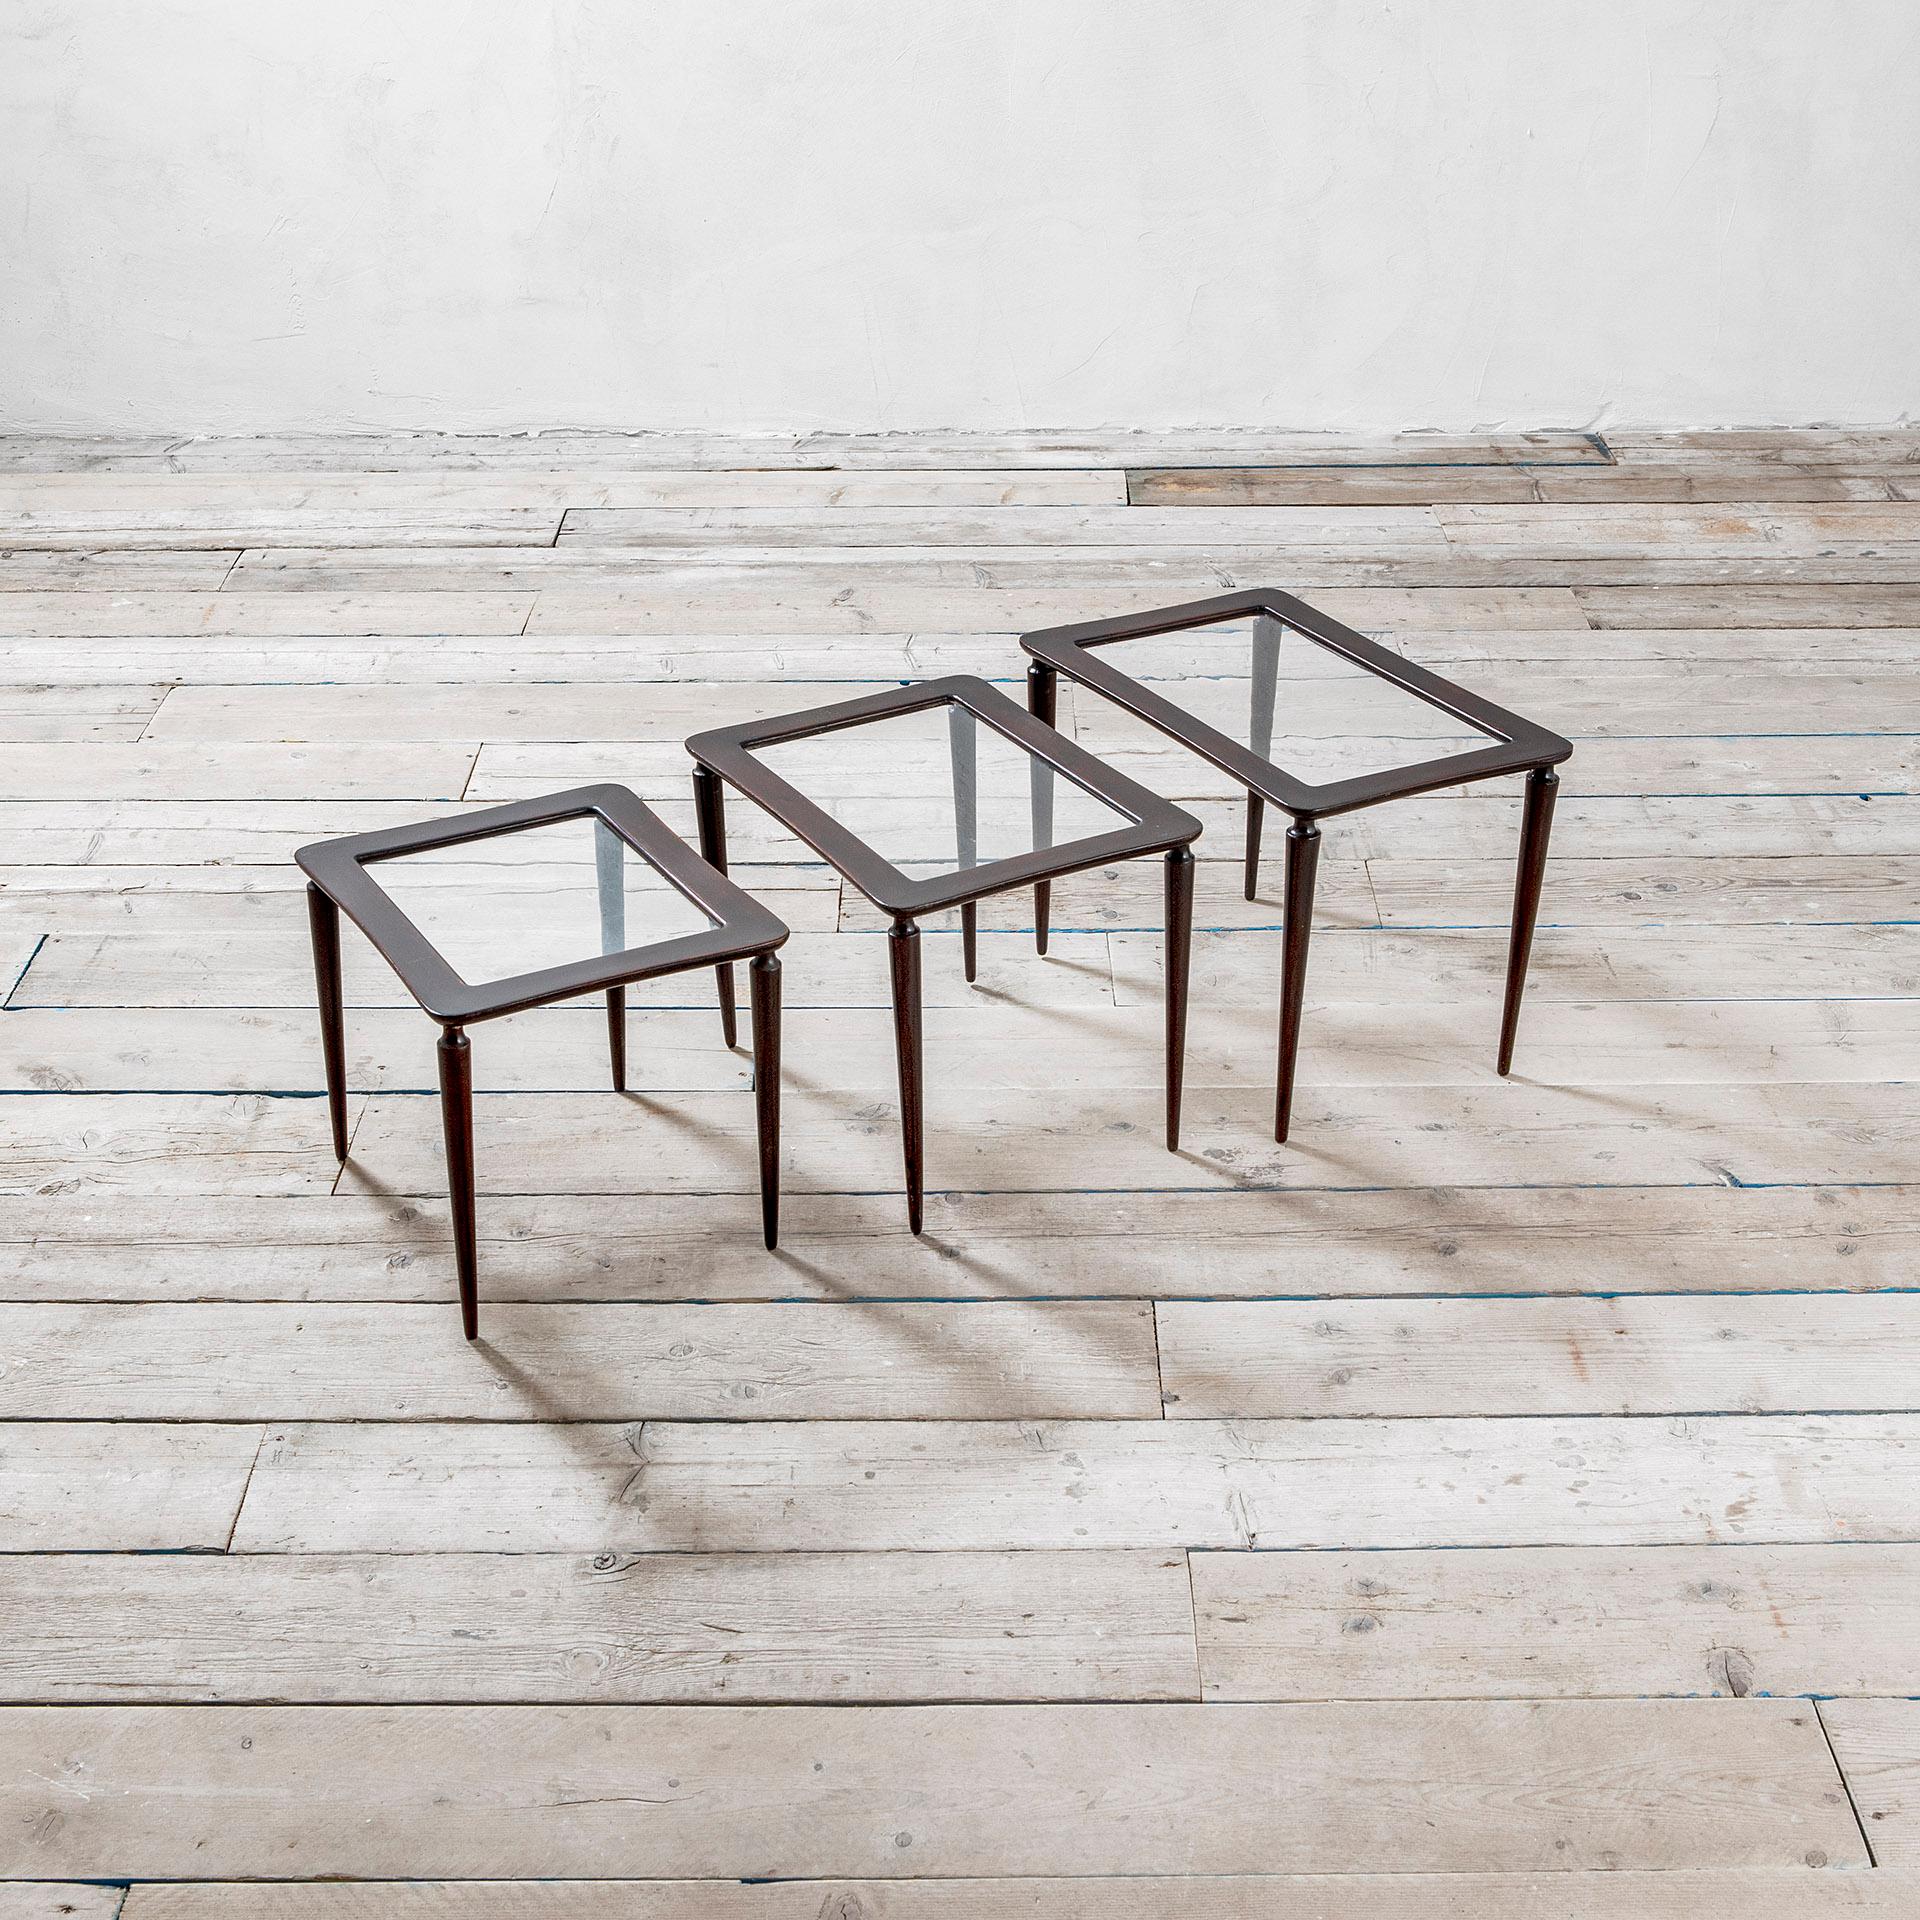 Coffee table composed of 3 stackable tables model n. 401 designed by Ico Parisi in the half of 1950s for De Baggis Production. Each stackable table has feet and frame of the tom in wood, and the top is in glass. Feet are detachable. Original in all